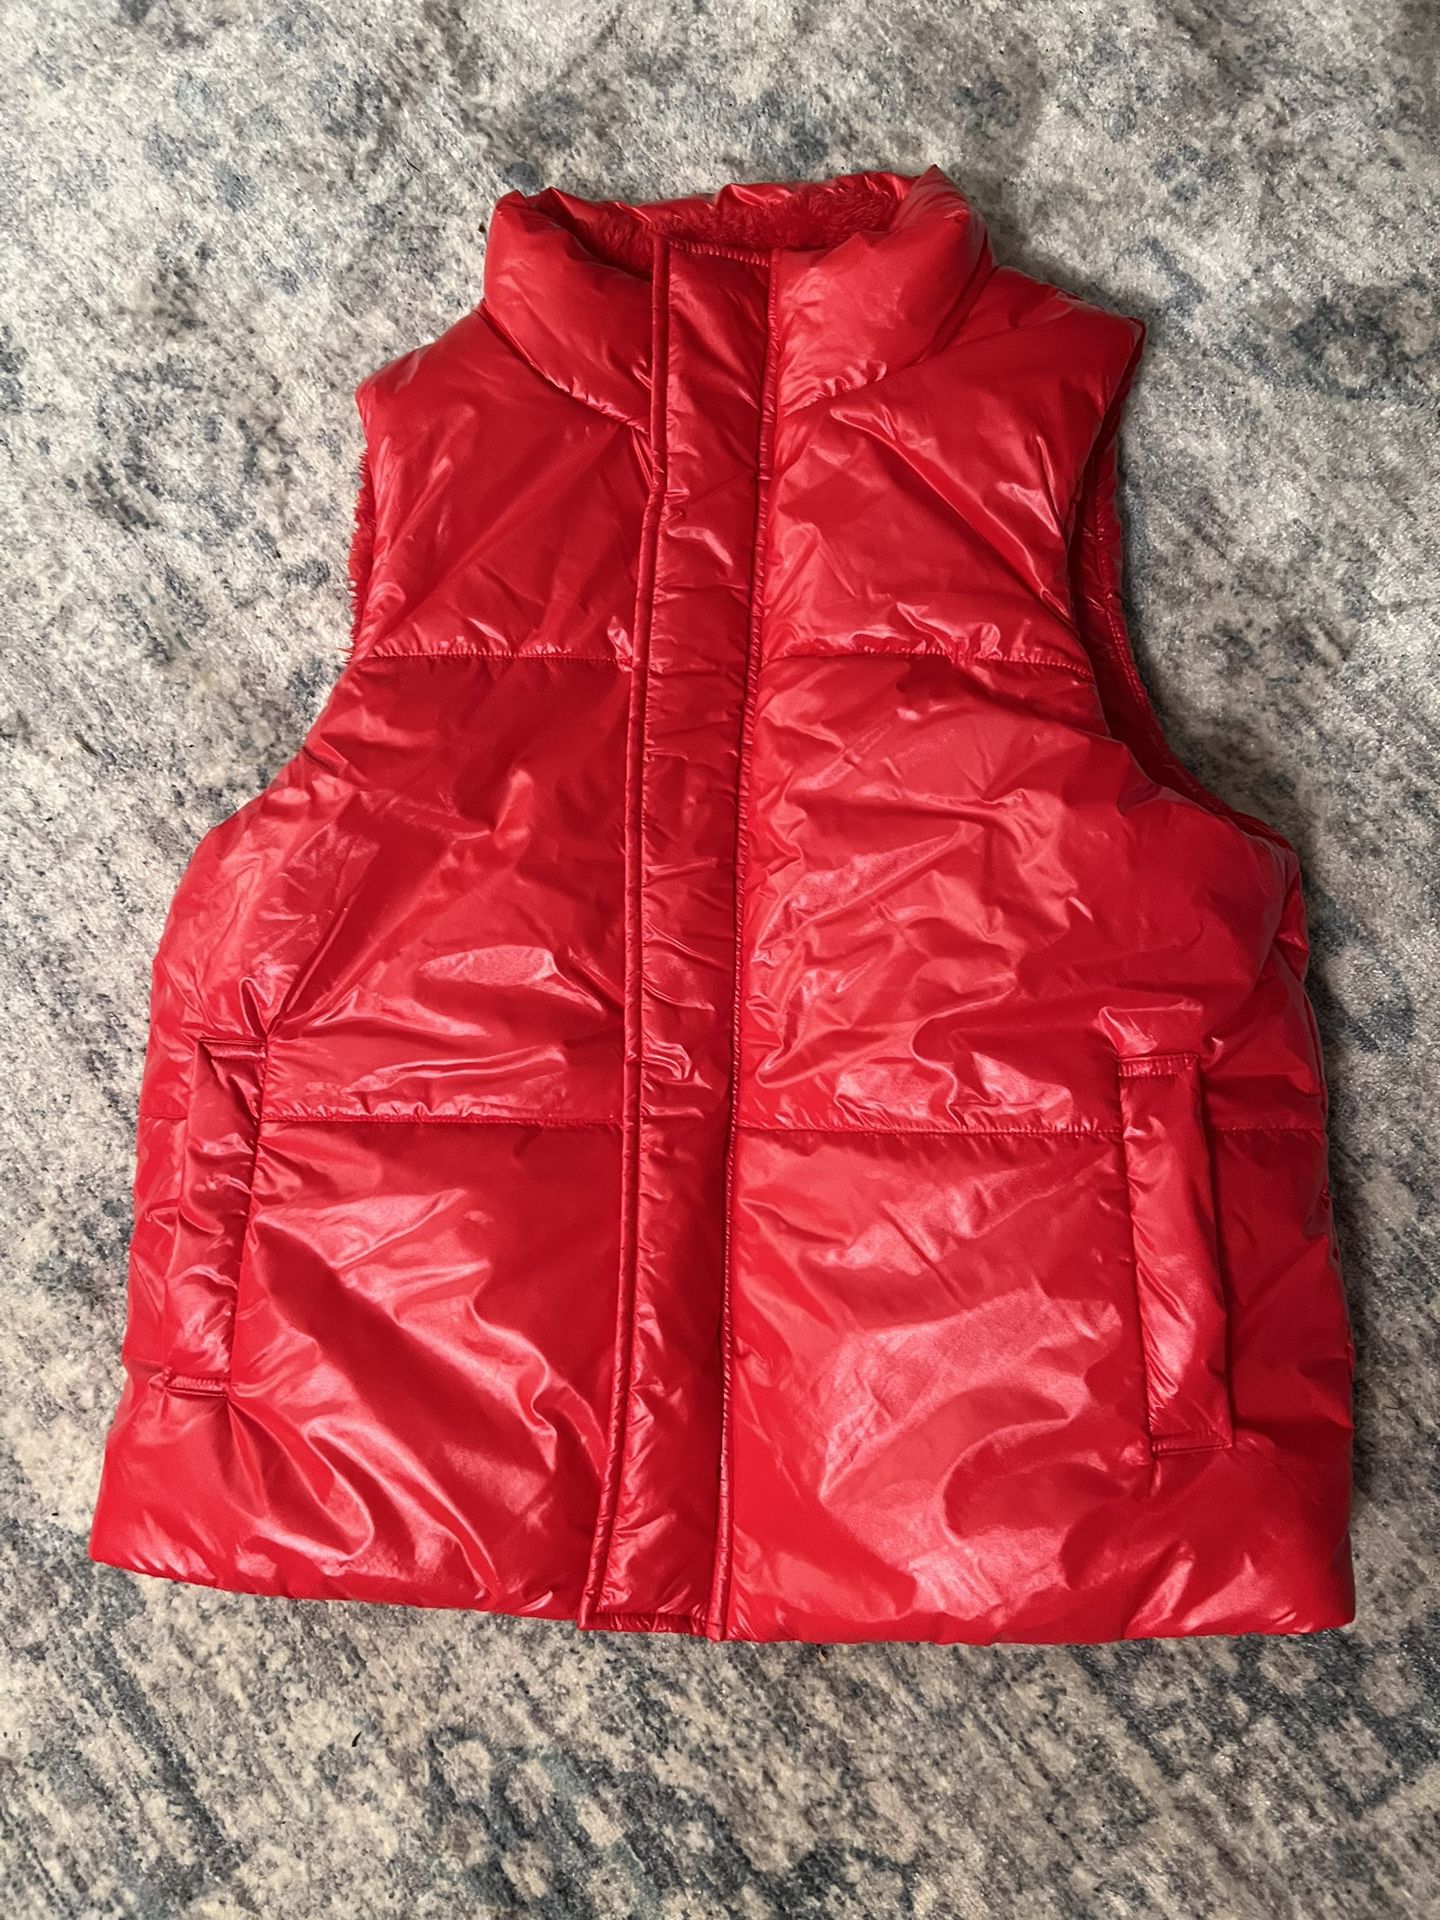 A New Day Red Puffer Vest/Jacket